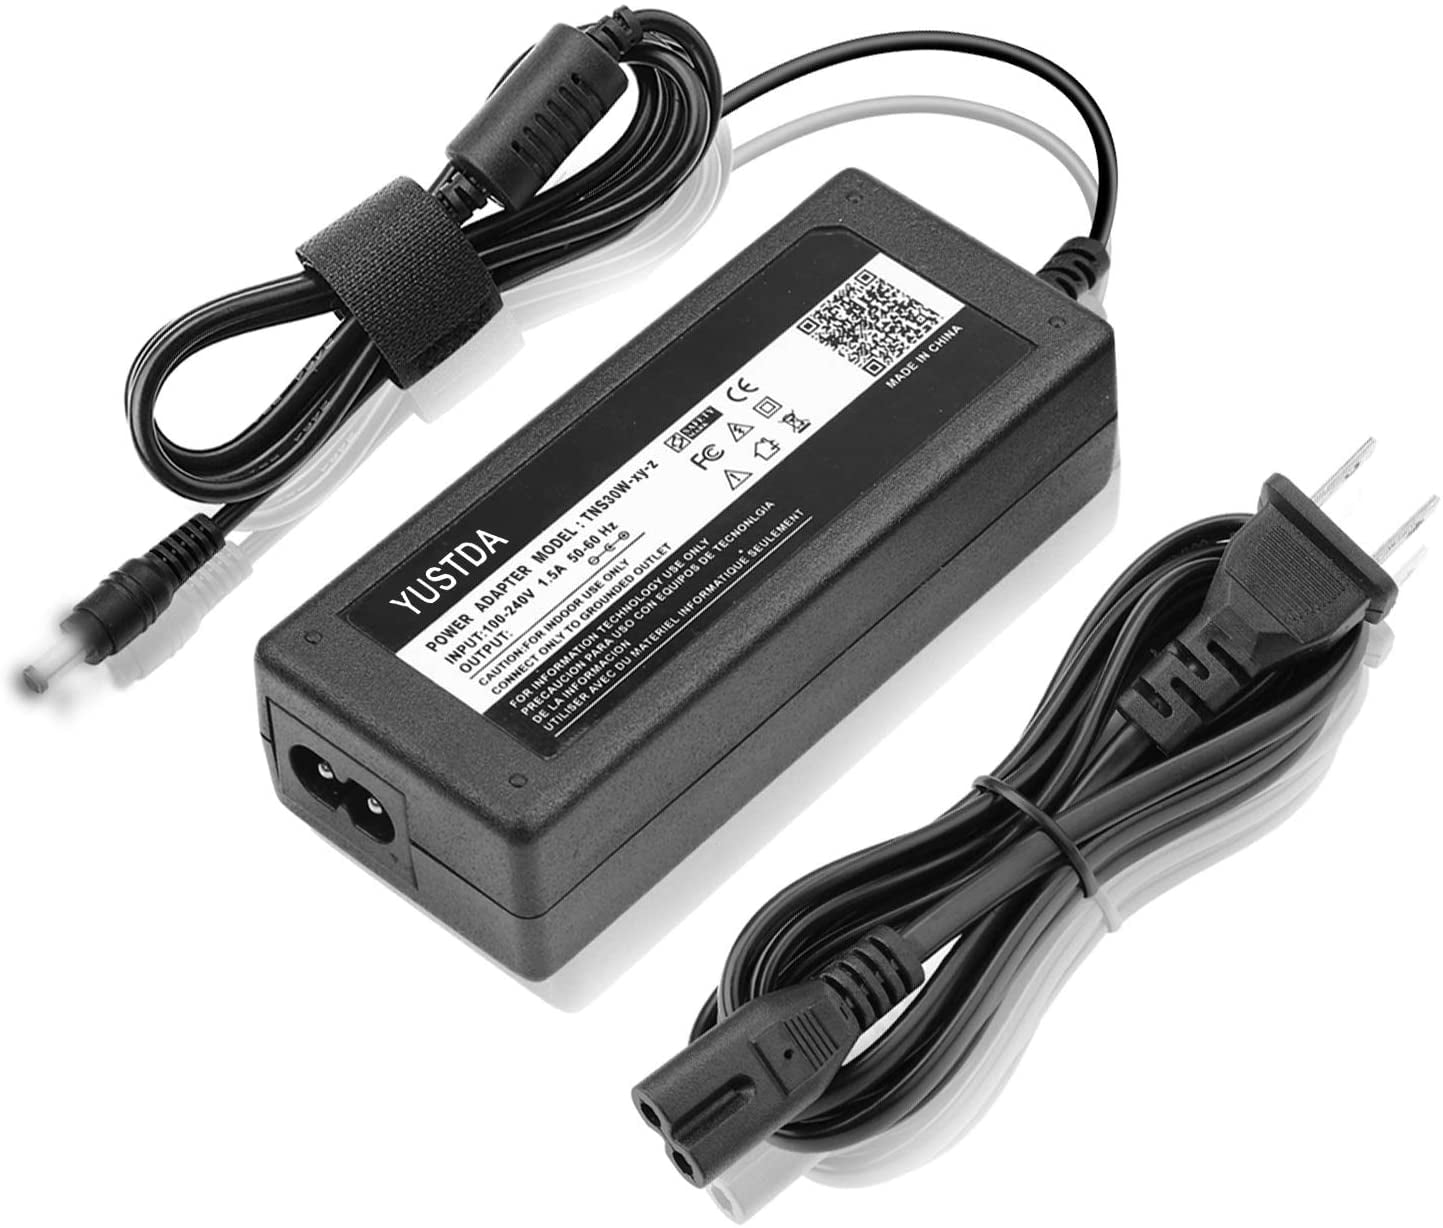 WALL Charger AC power adapter for JNC318 Jump-N-Carry 500 Peak Amp jump starter 